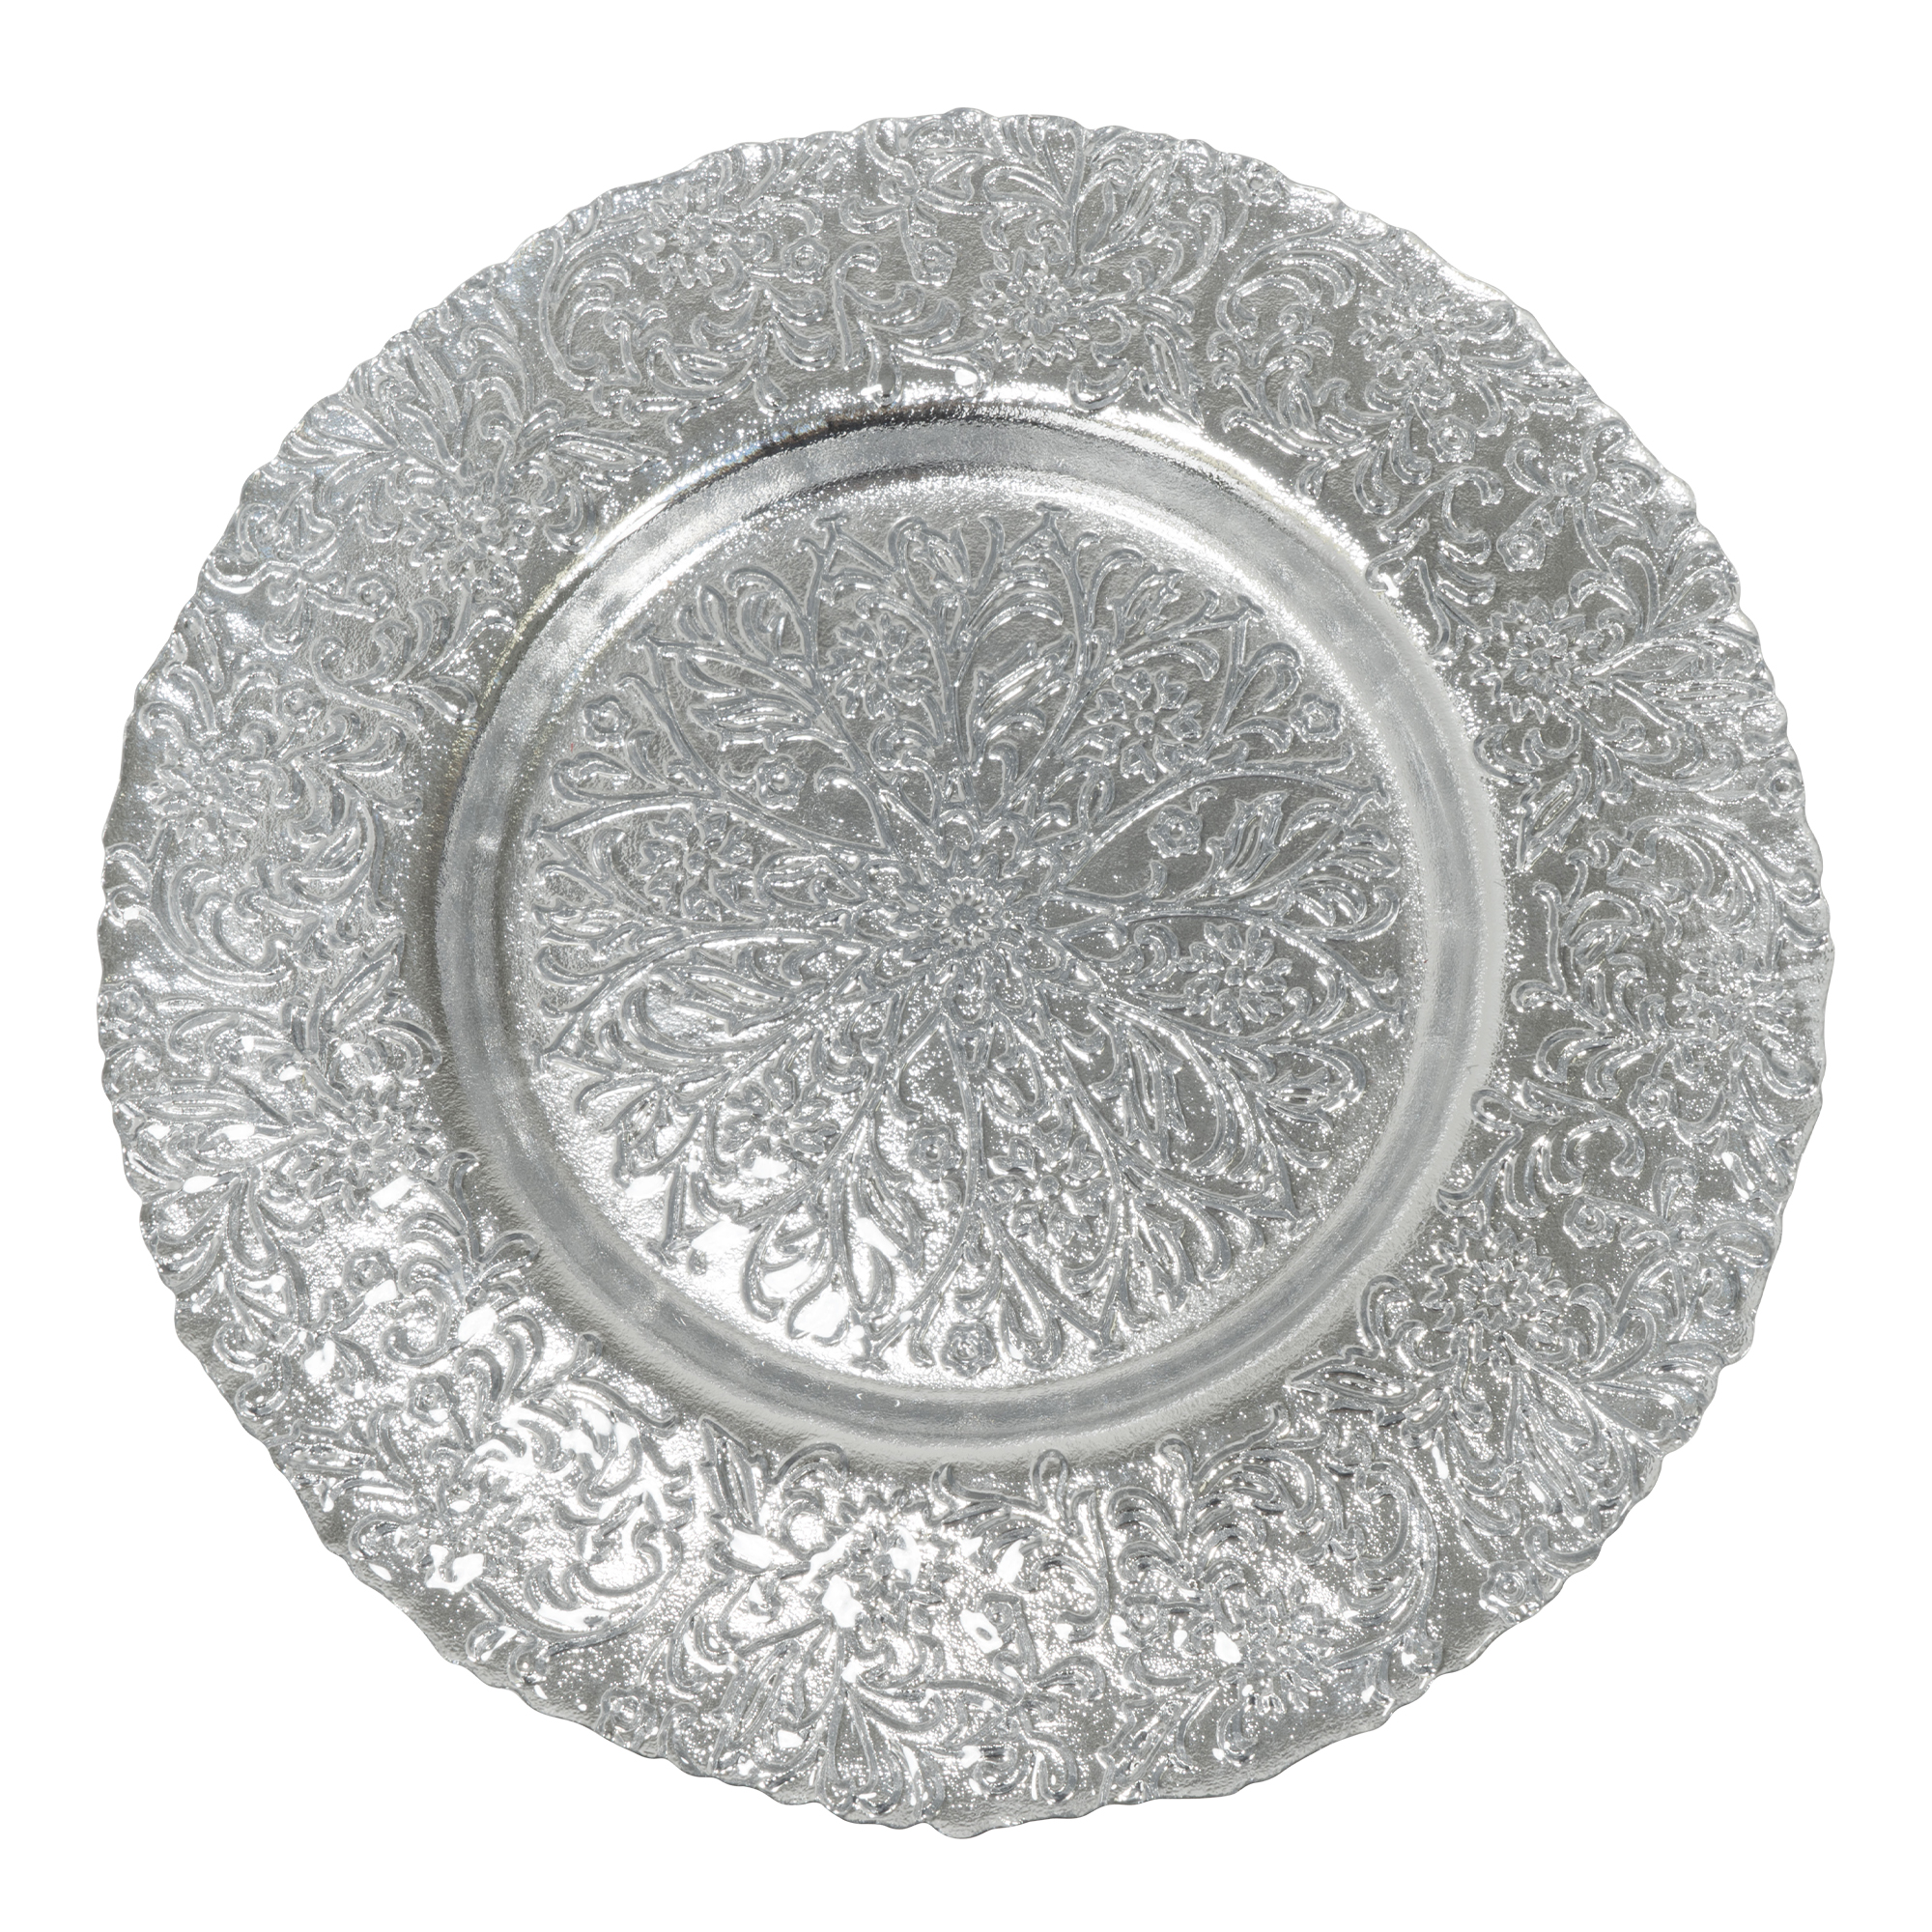 Floral Pattern Glass Charger Plate 13" - Silver